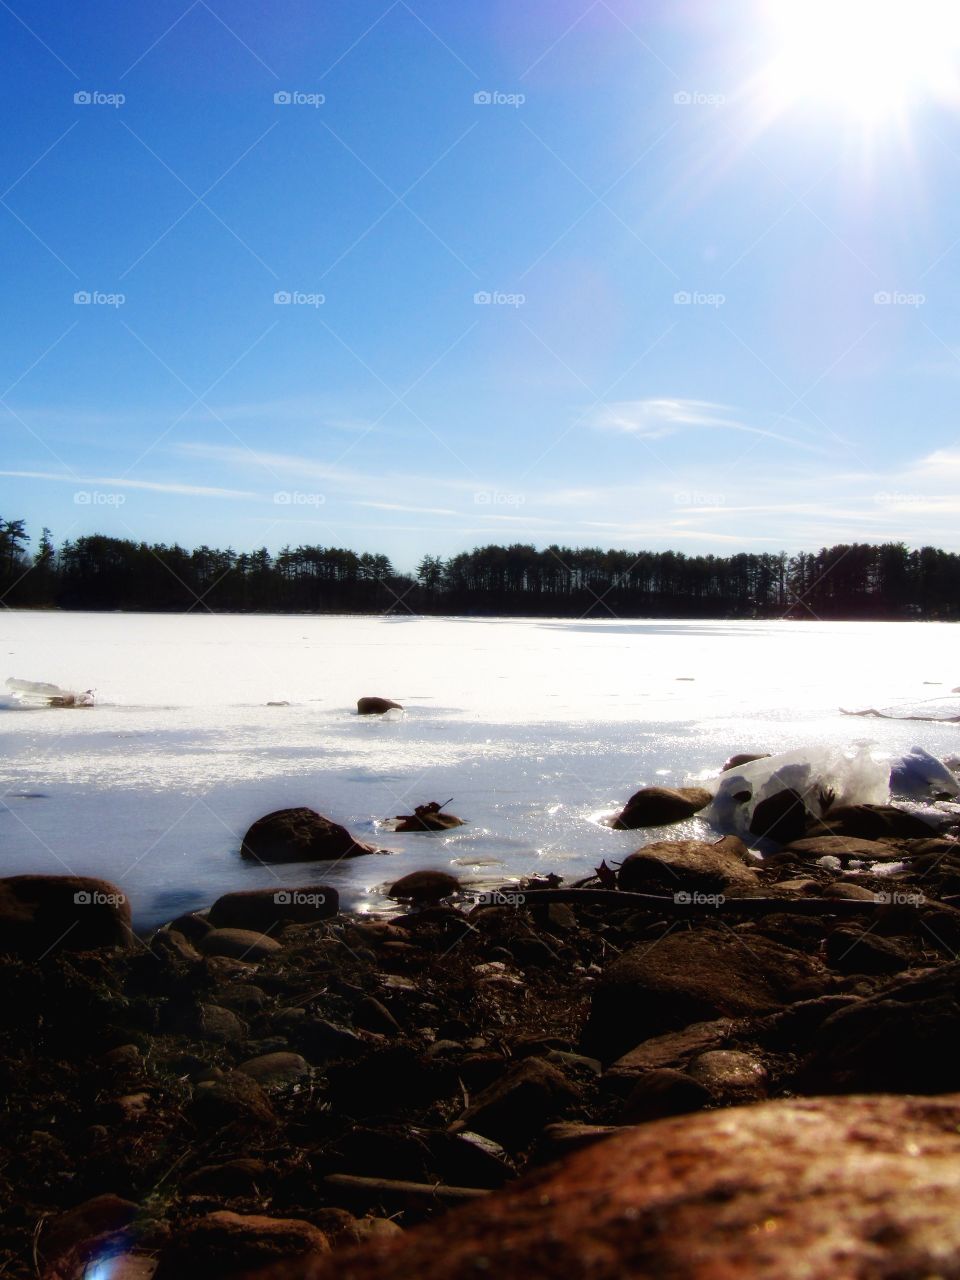 Frozen pond. A sunny day with blue skies. Winter time